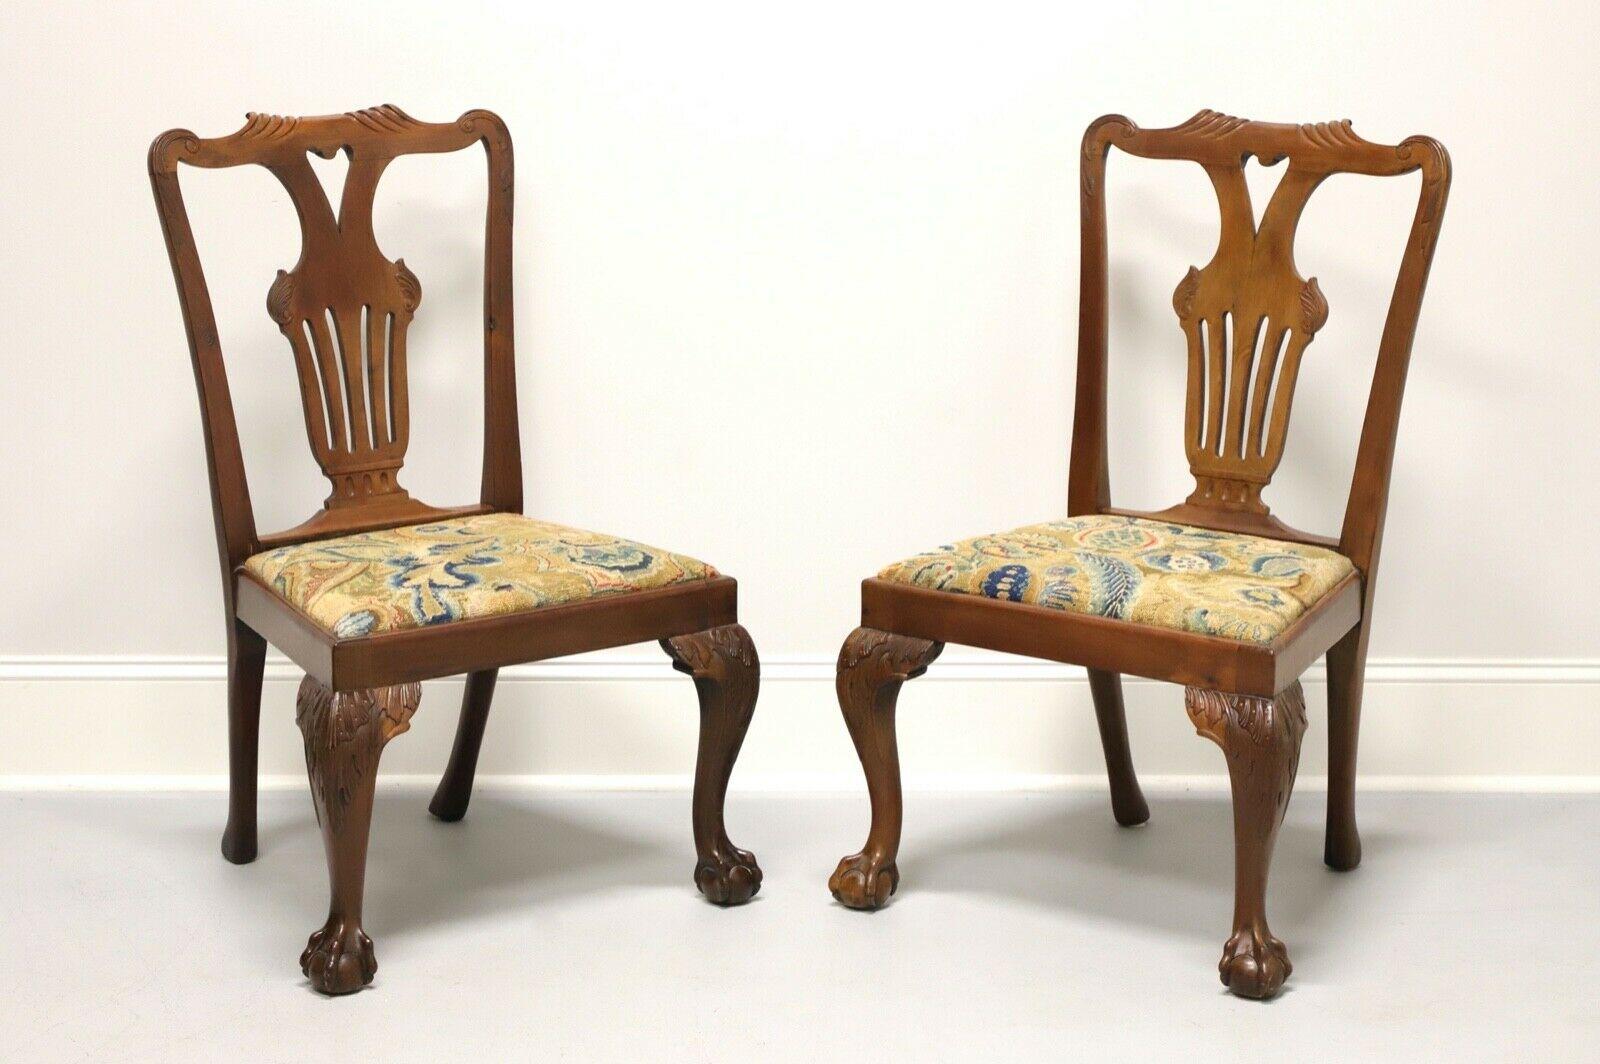 Antique 19th Century Carved Walnut Chippendale Ball n Claw Dining Chairs - Pair For Sale 3